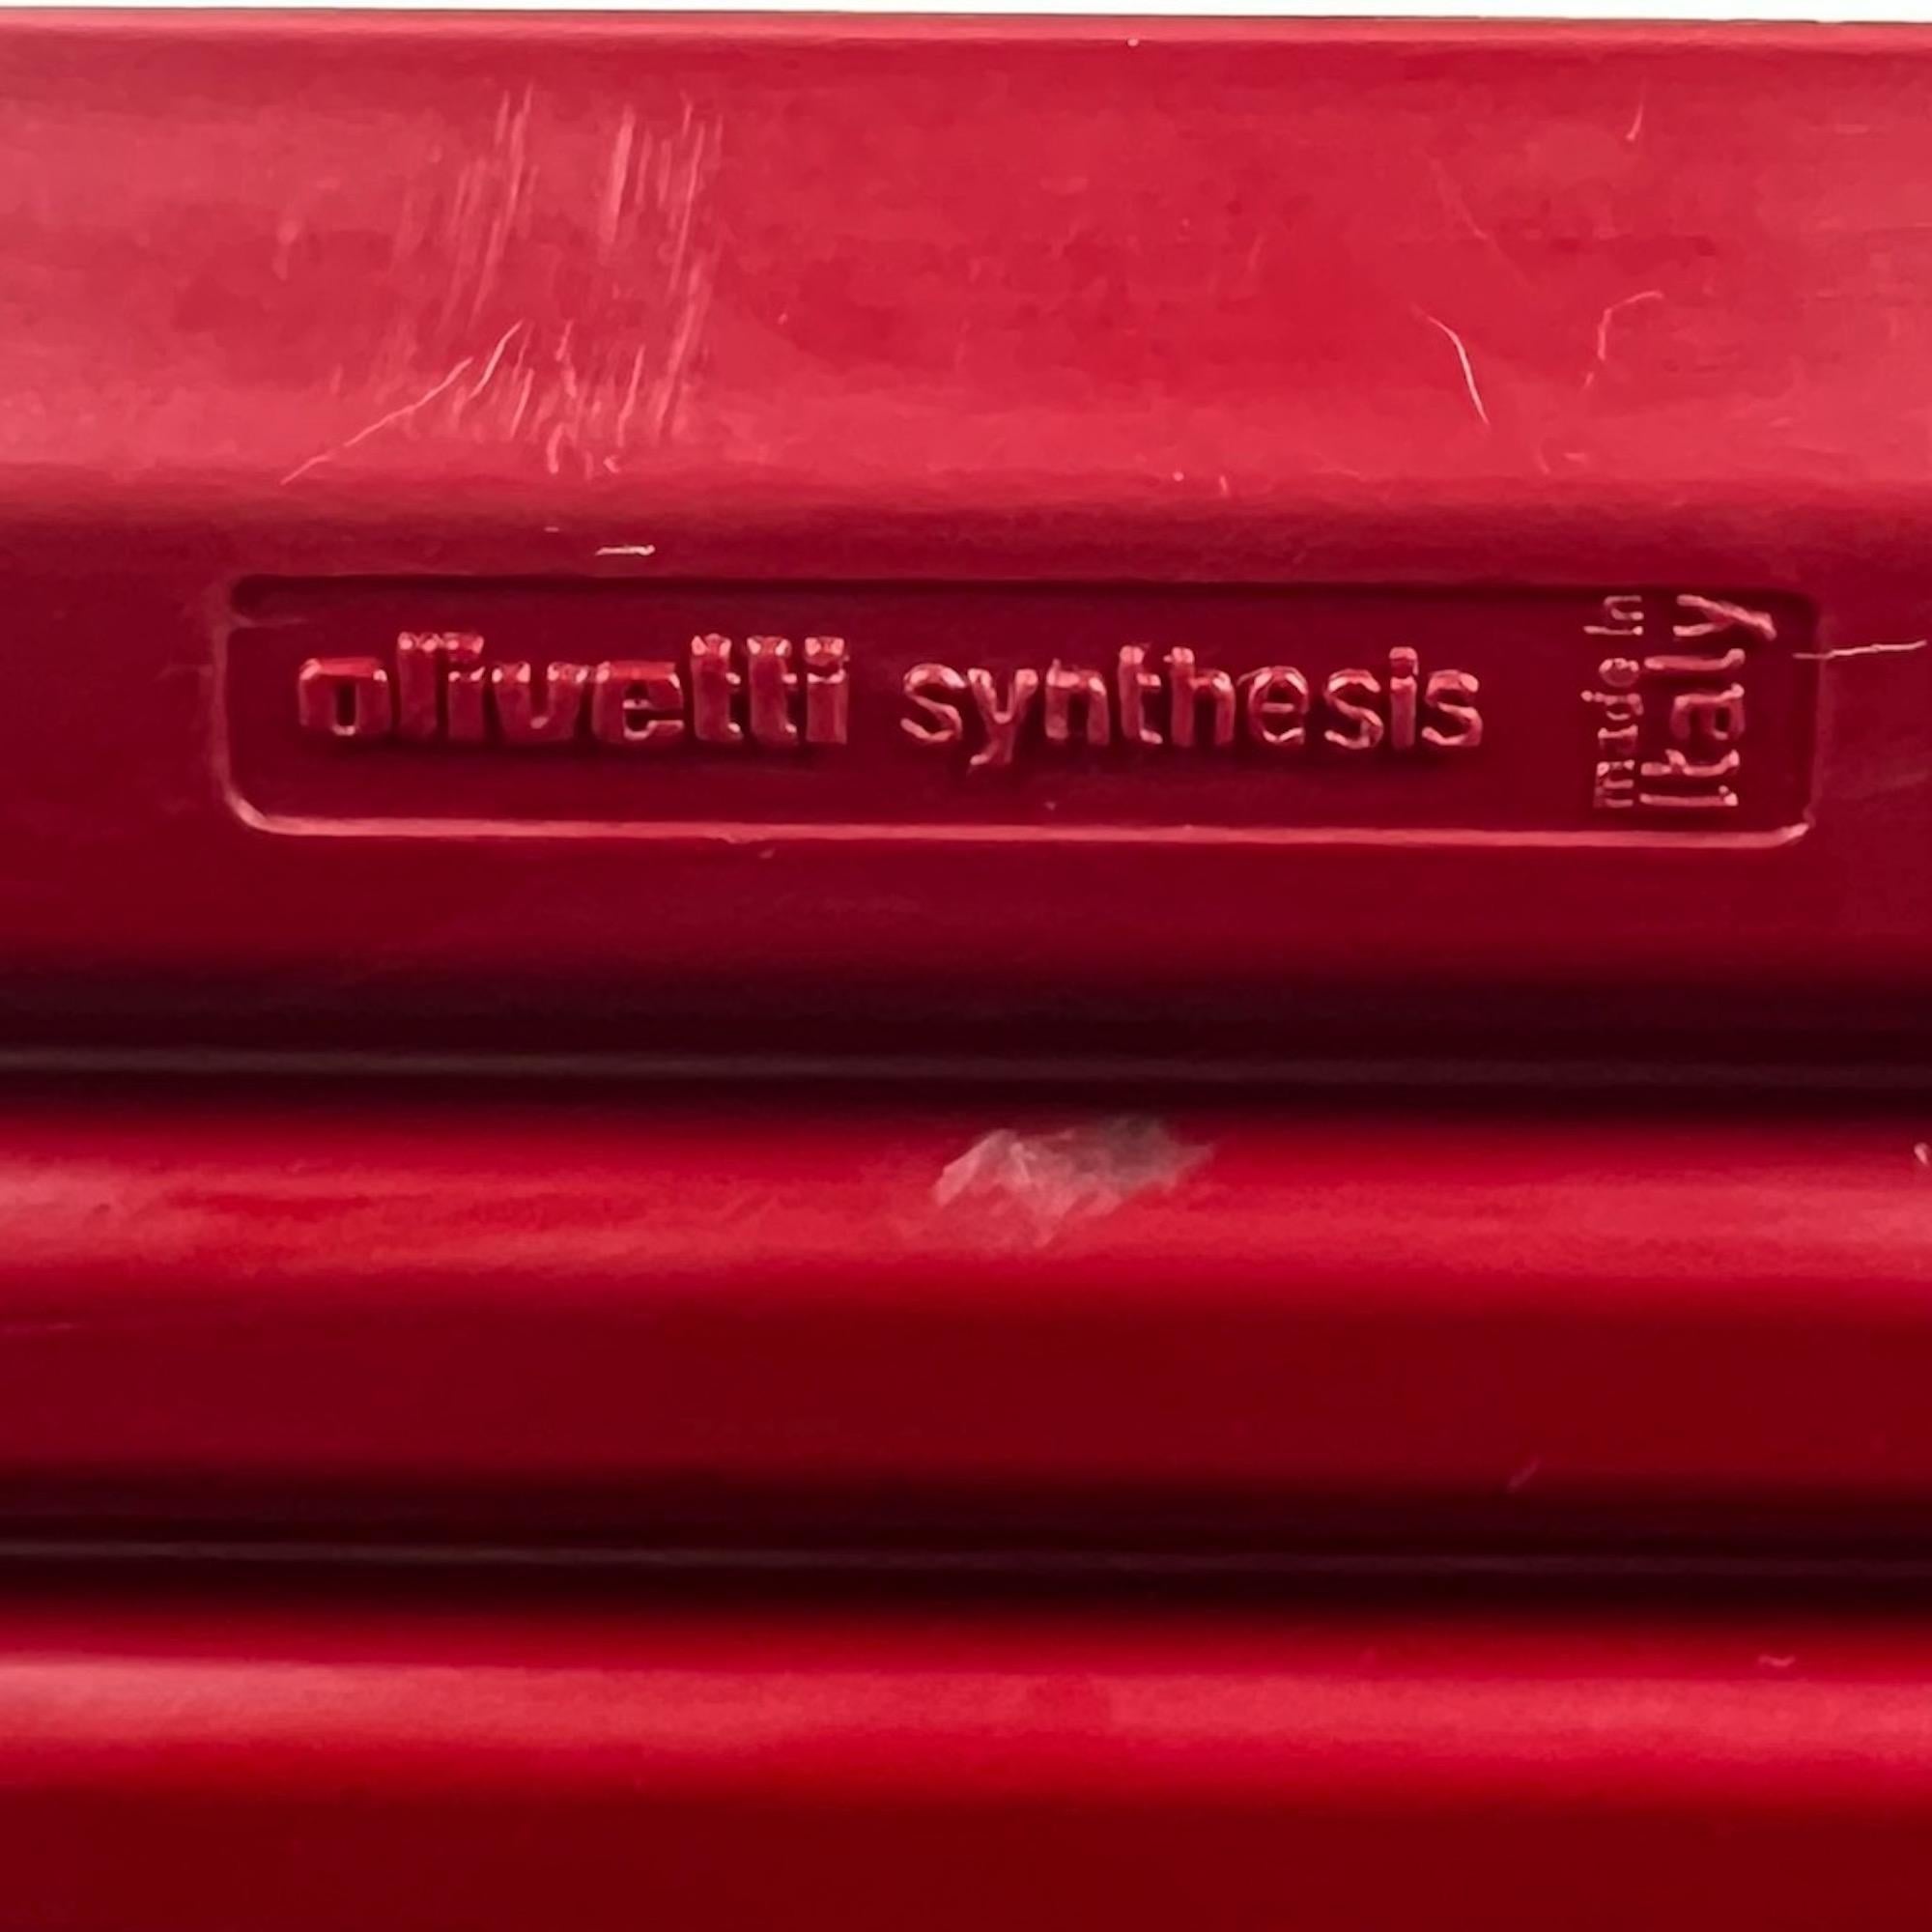 Industrial Ettore Sottsass 1970s Melamine Office Set Olivetti Synthesis 45 For Sale